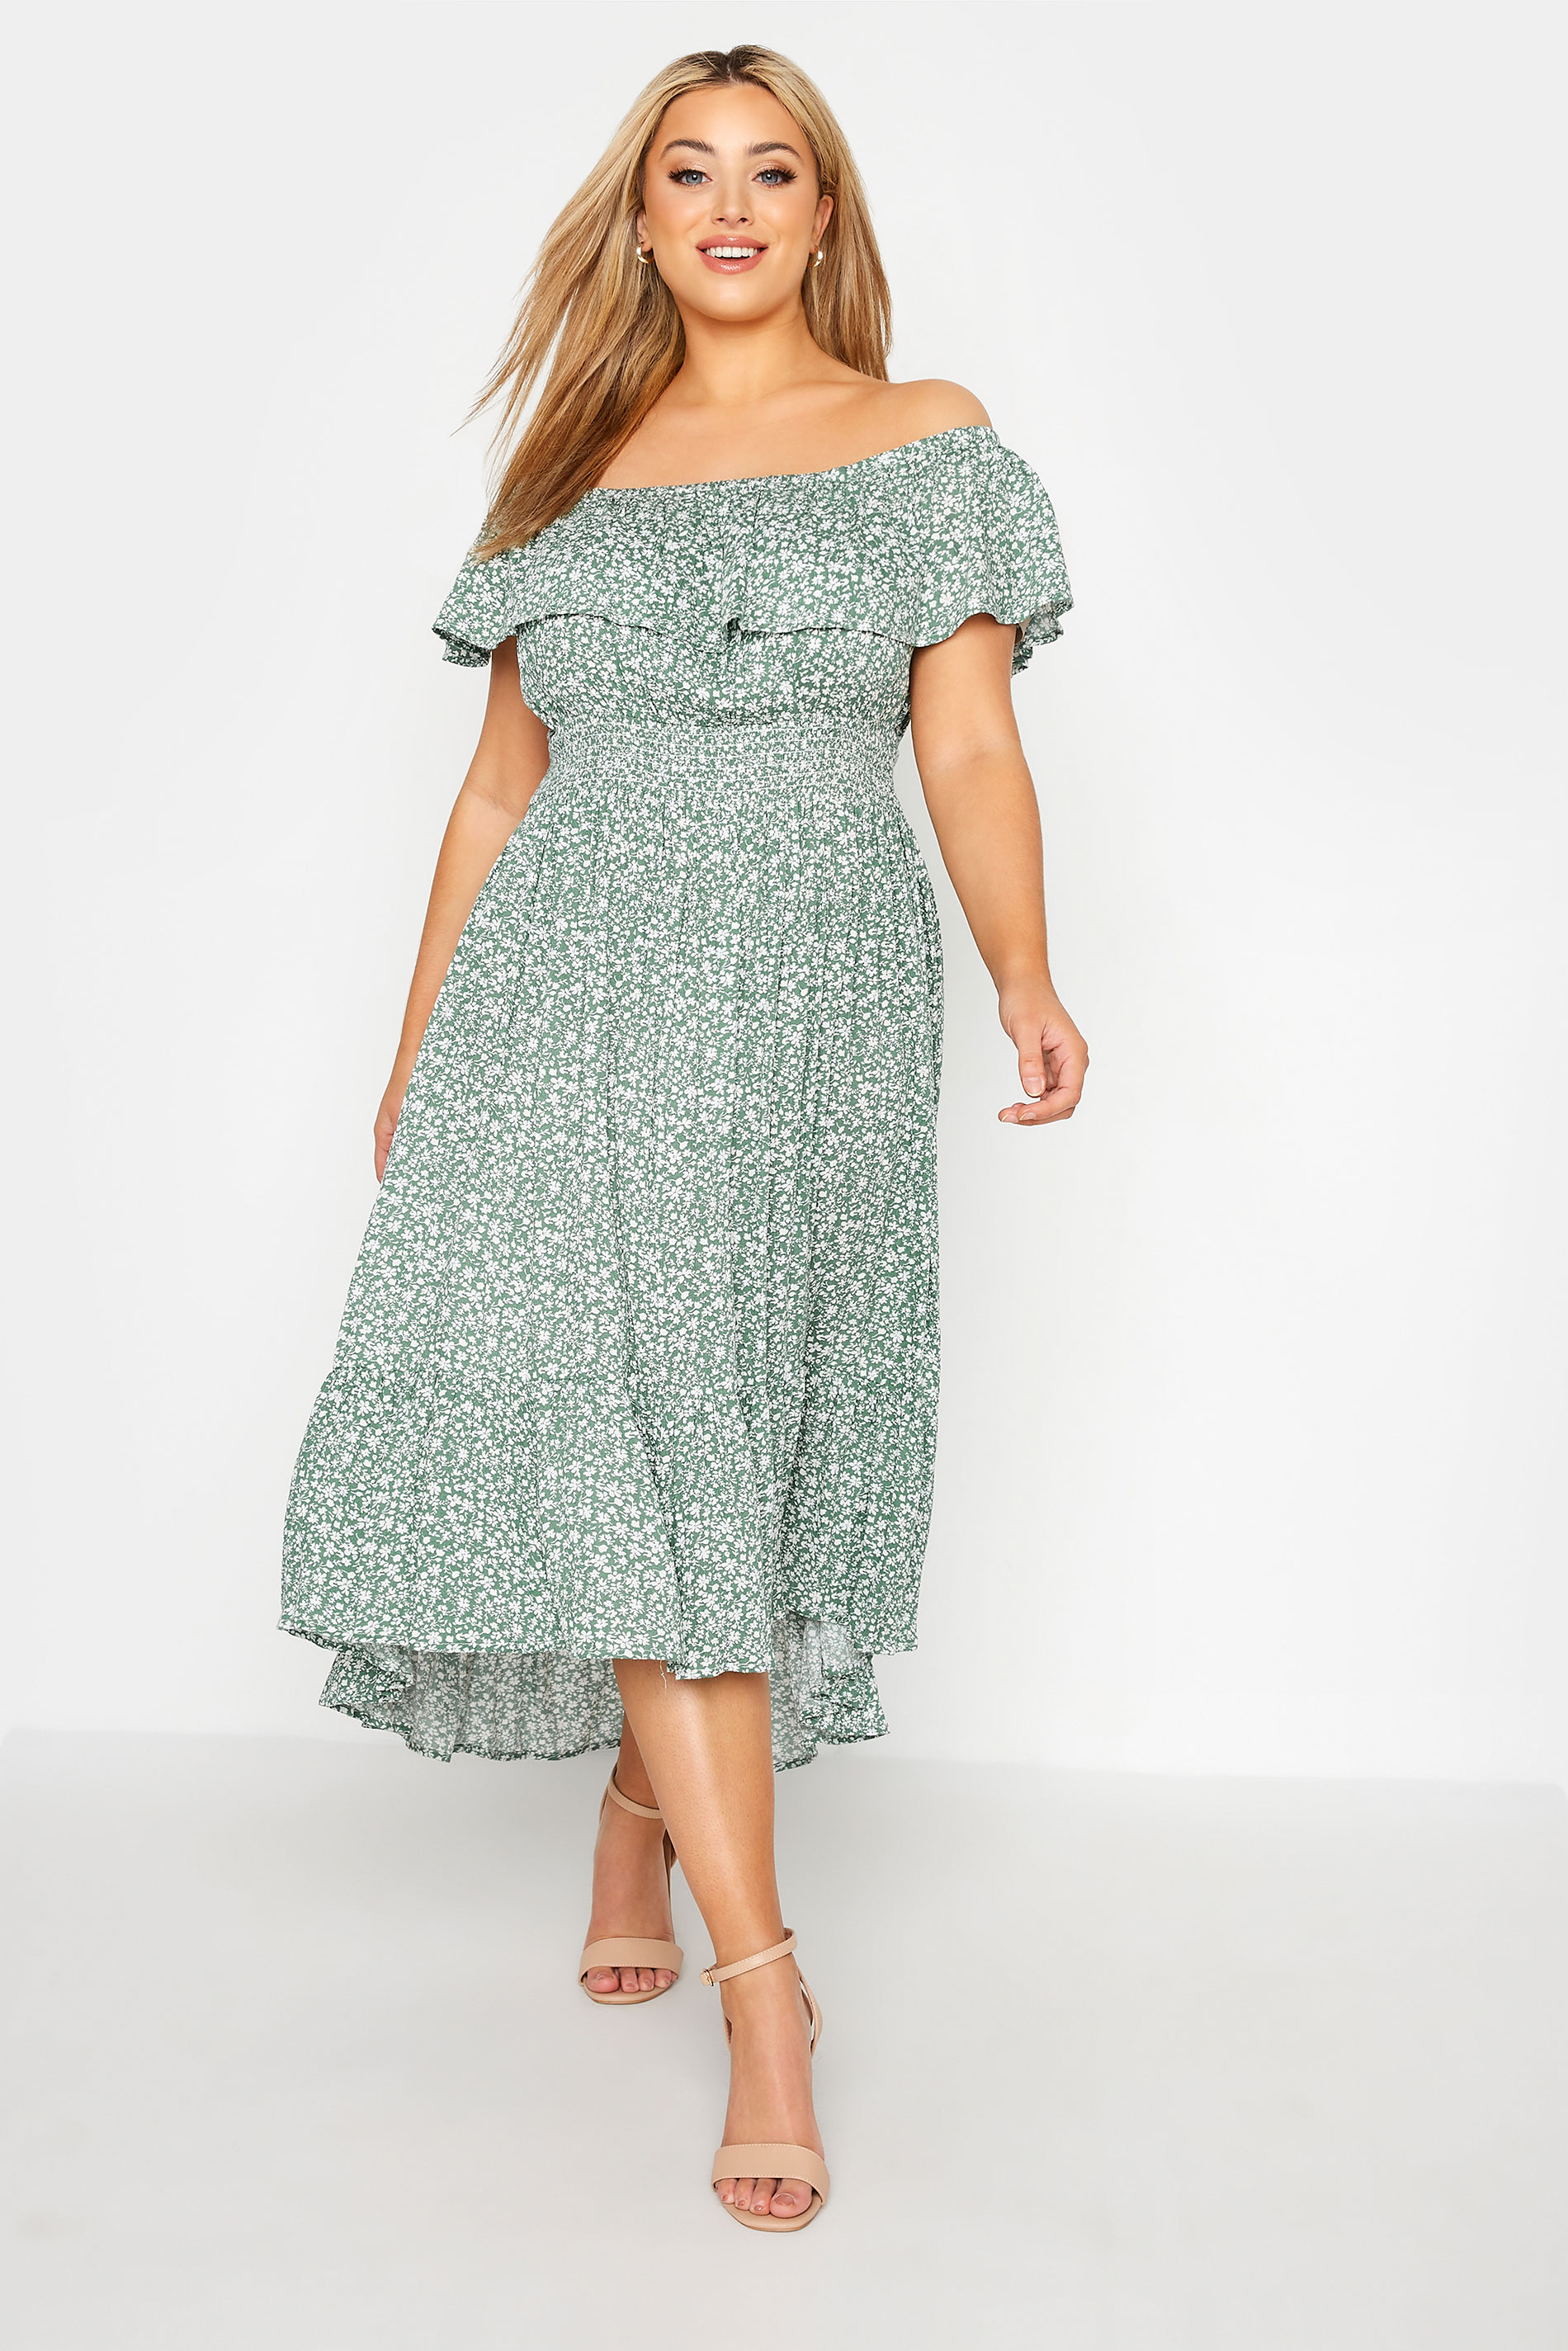 YOURS LONDON Curve Green Ditsy Floral Bardot Dress_A.jpg